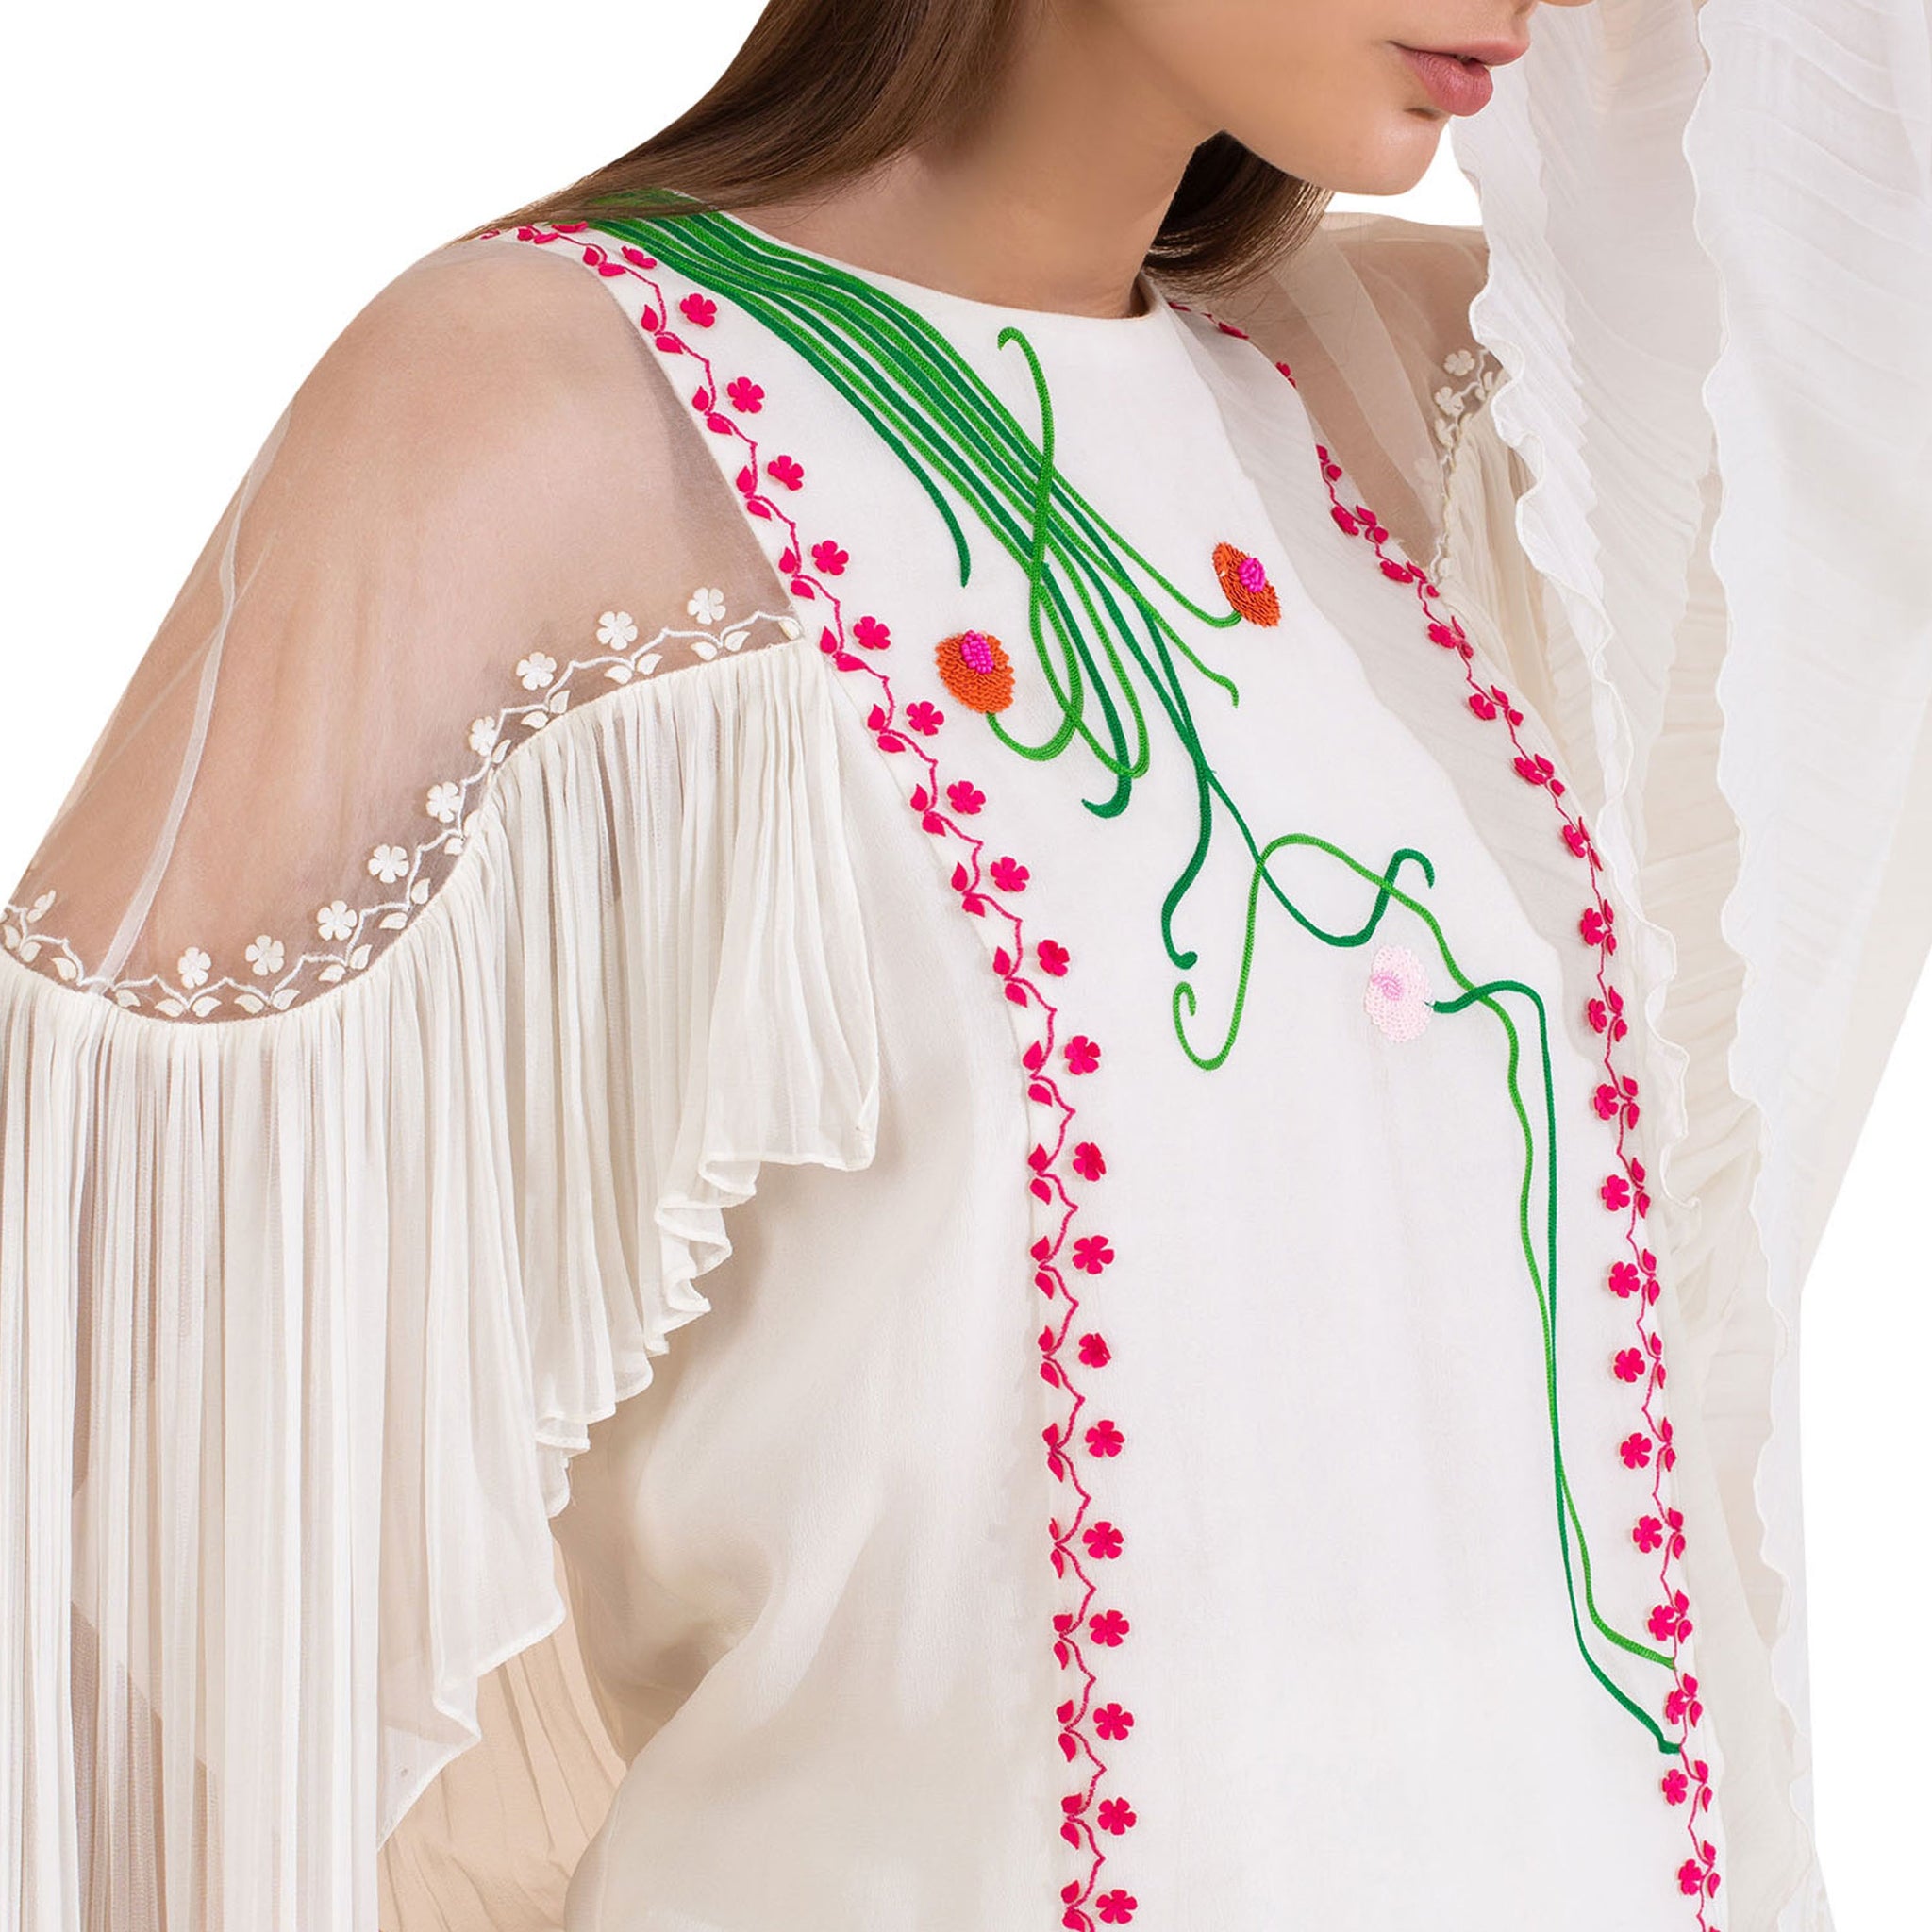 Embroidered Top with Statement Sleeves